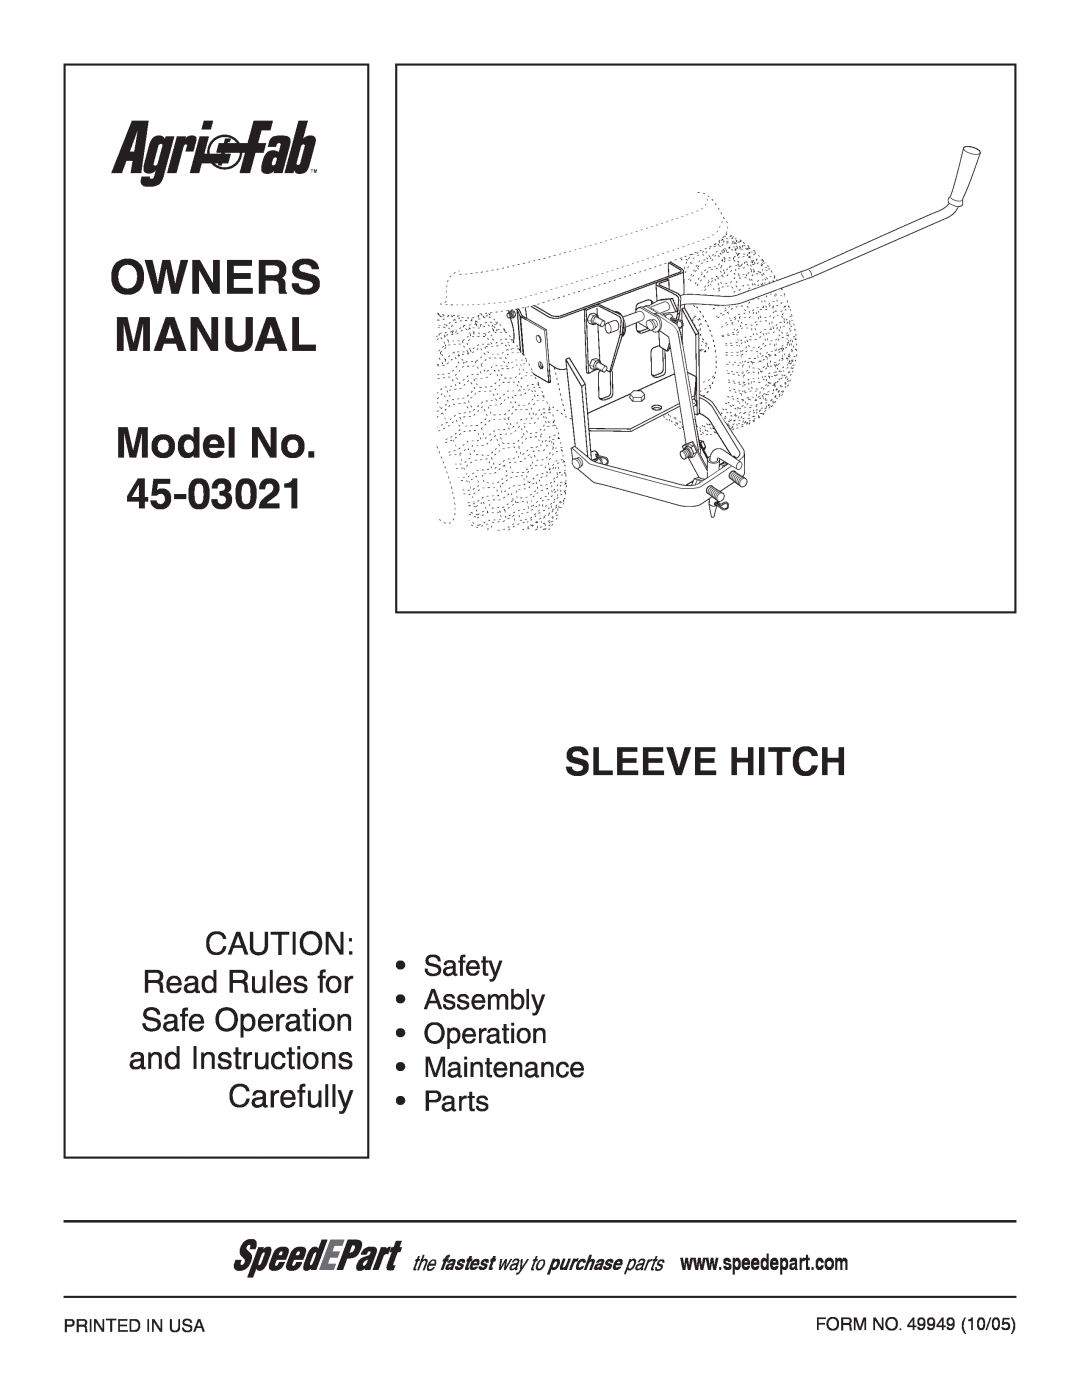 Husqvarna I0807213 Model No, Sleeve Hitch, Read Rules for, Safe Operation, Carefully, and Instructions, Safety, Assembly 